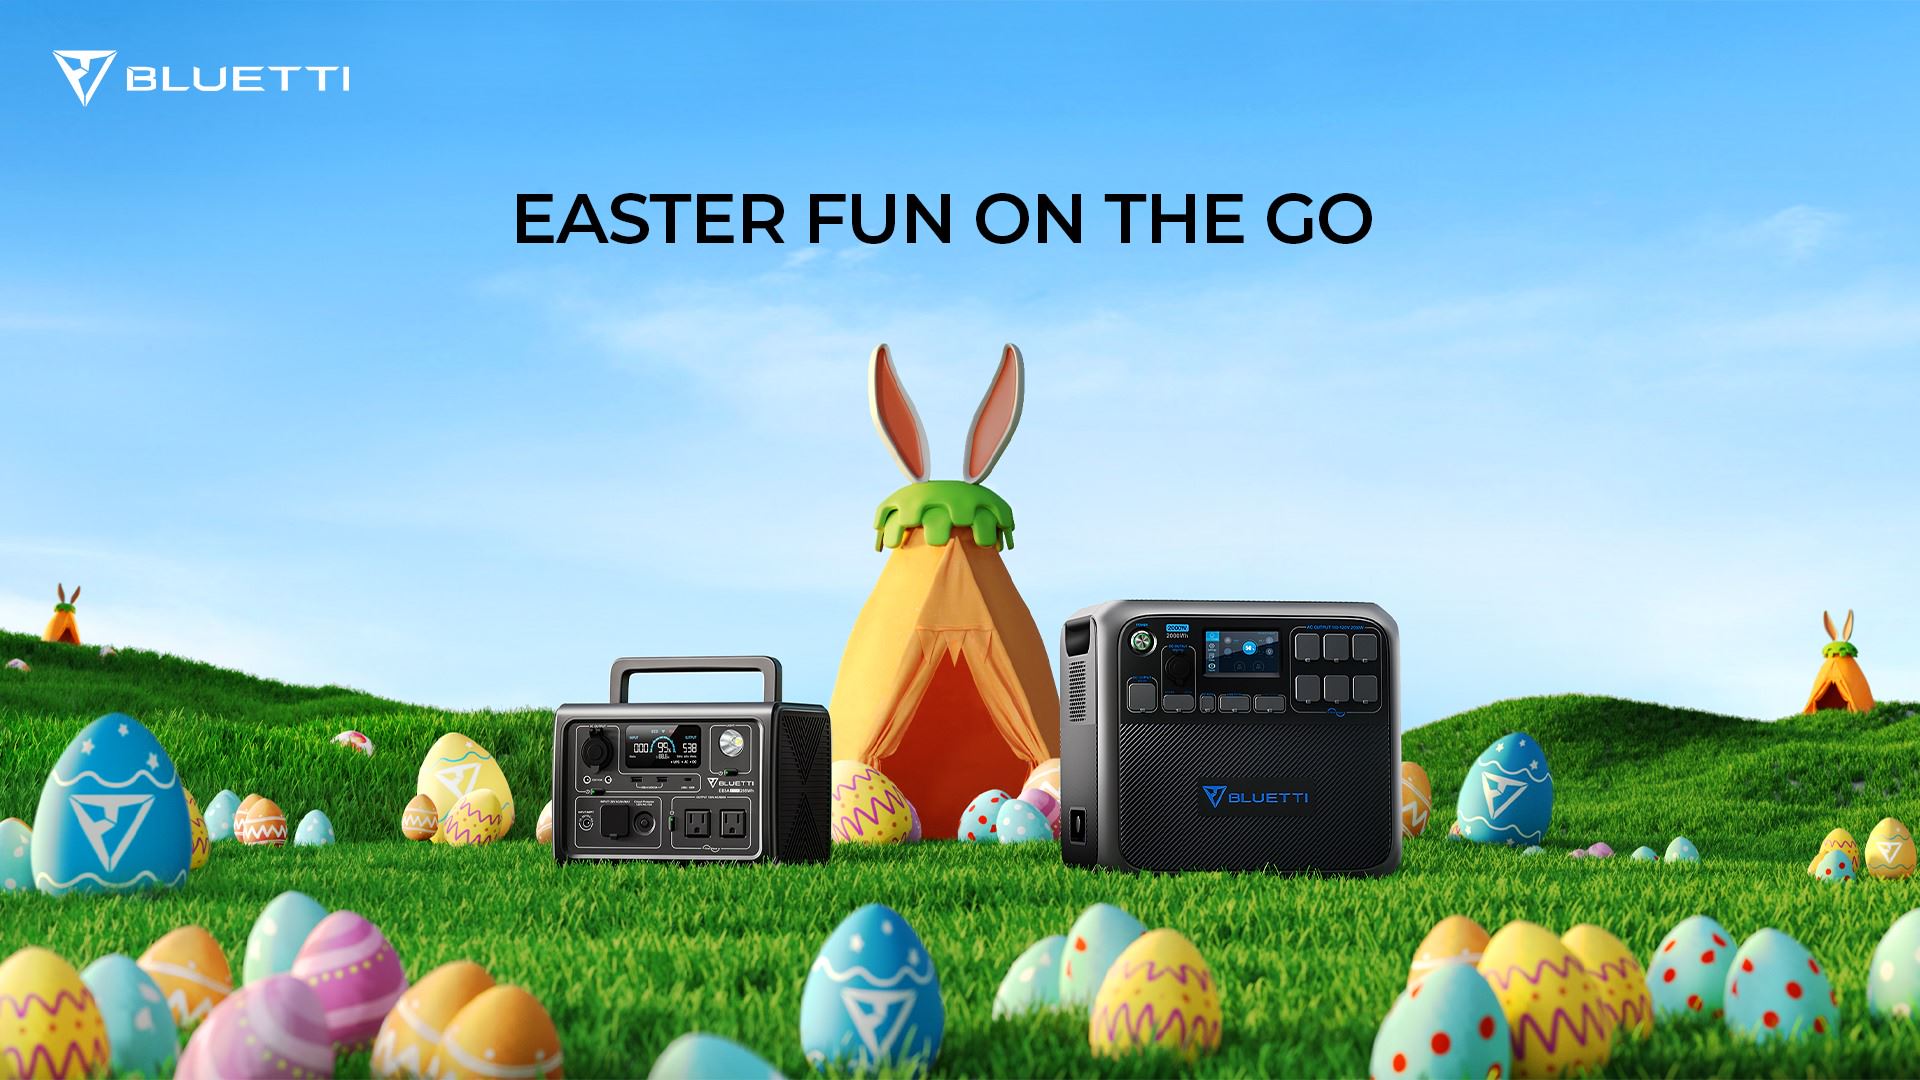 The BLUETTI Easter Sale Offers a Fun Egg Hunt On the Go